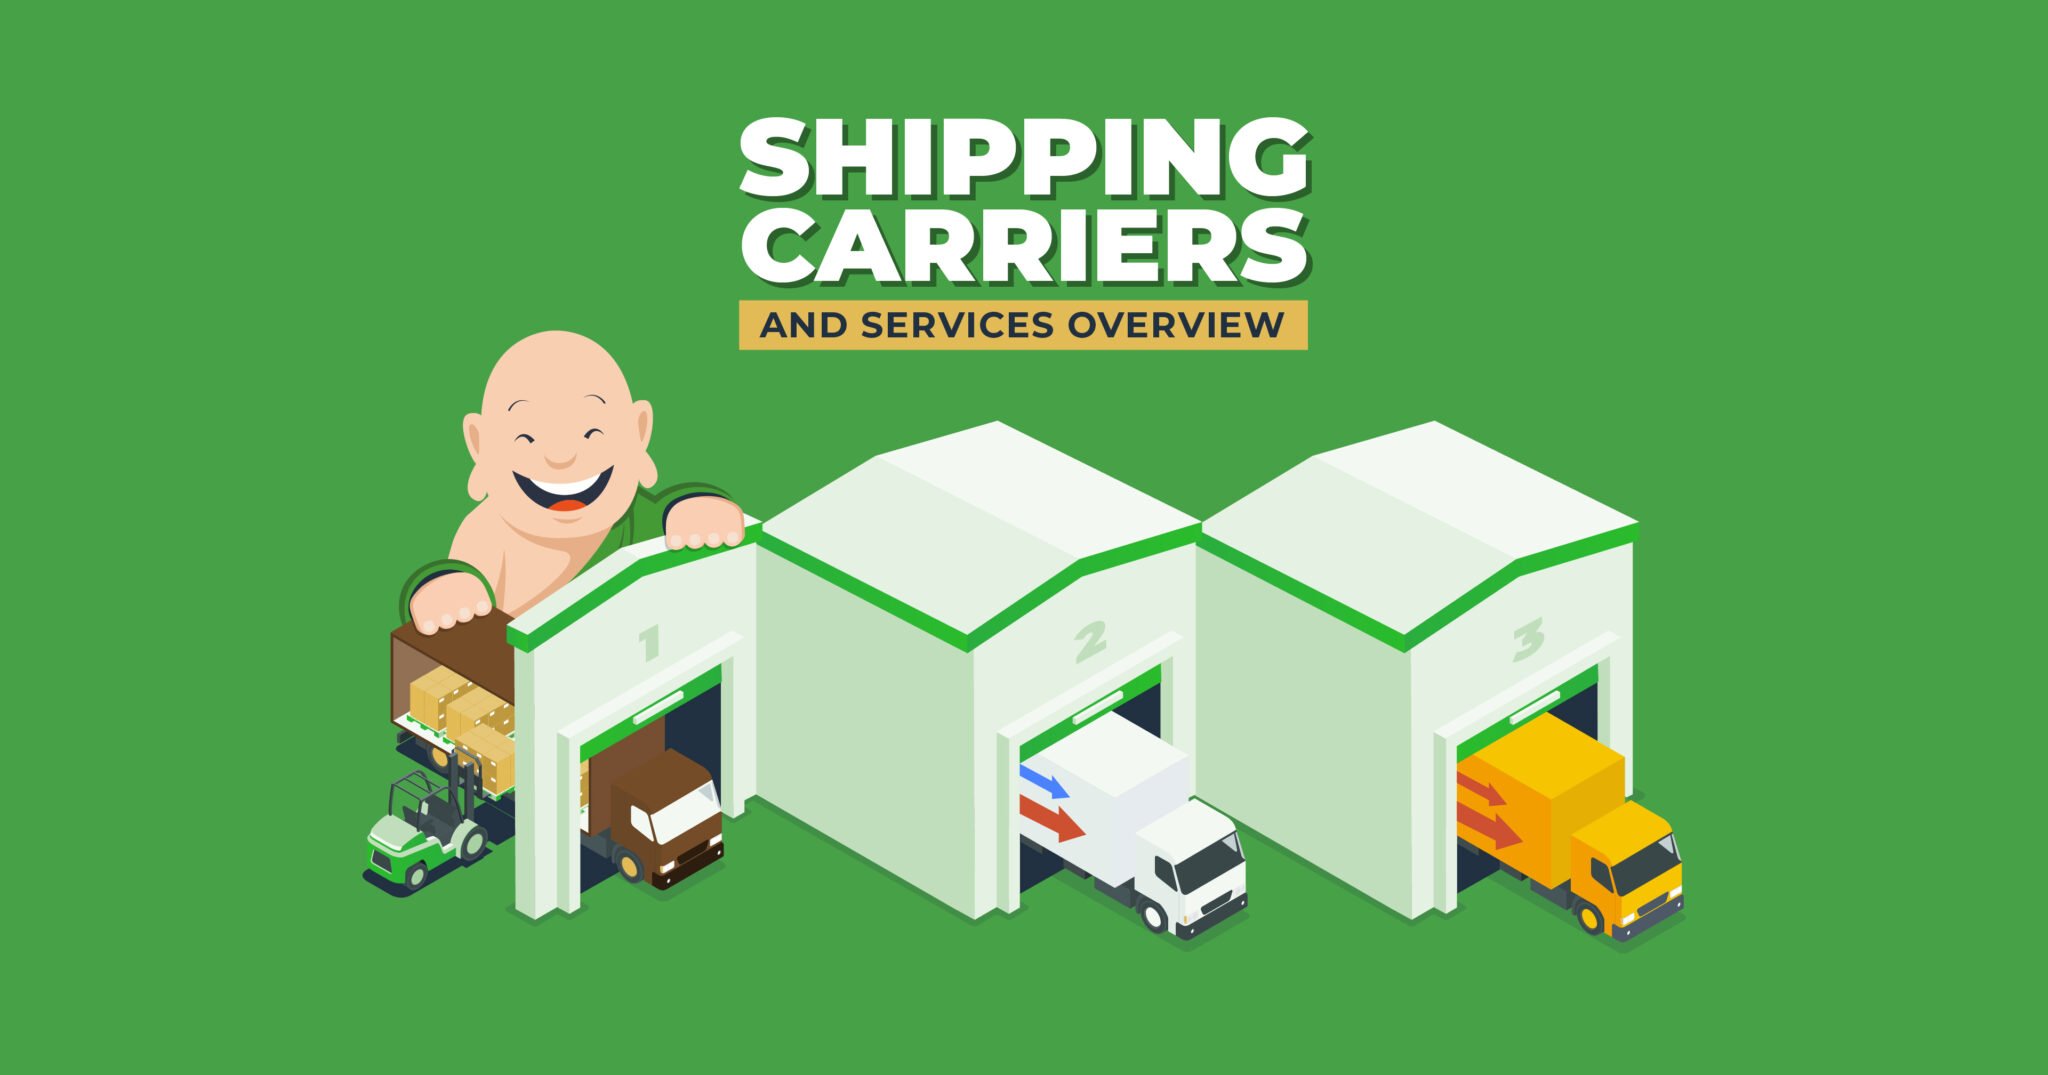 Shipping Carriers and Services Overview